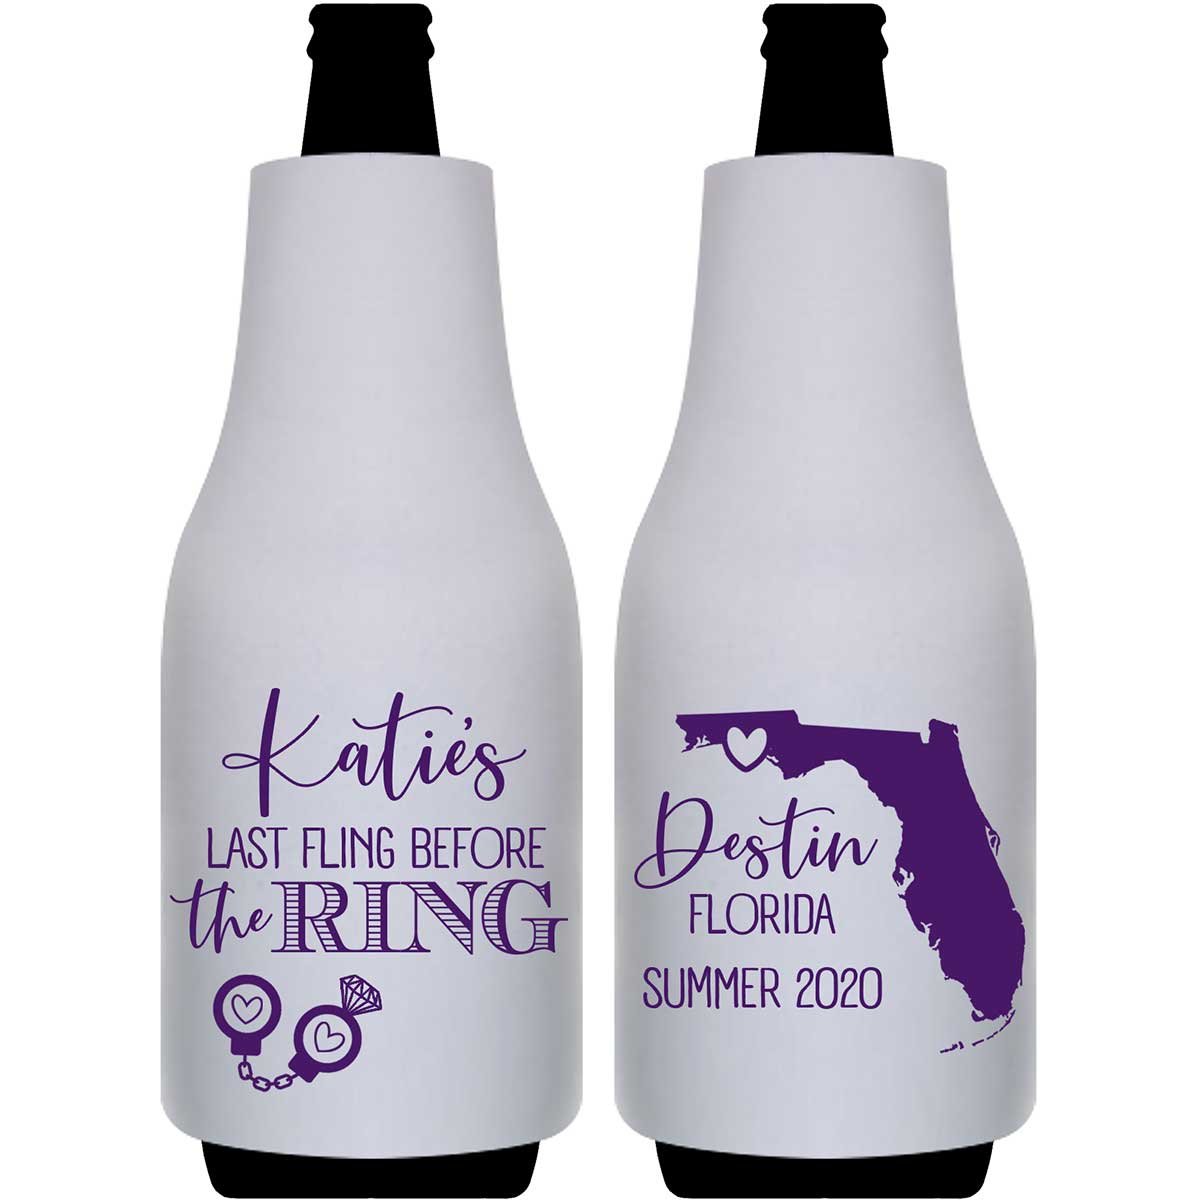 Last Fling Before The Ring 1A Any Map Foldable Bottle Sleeve Koozies Wedding Gifts for Guests